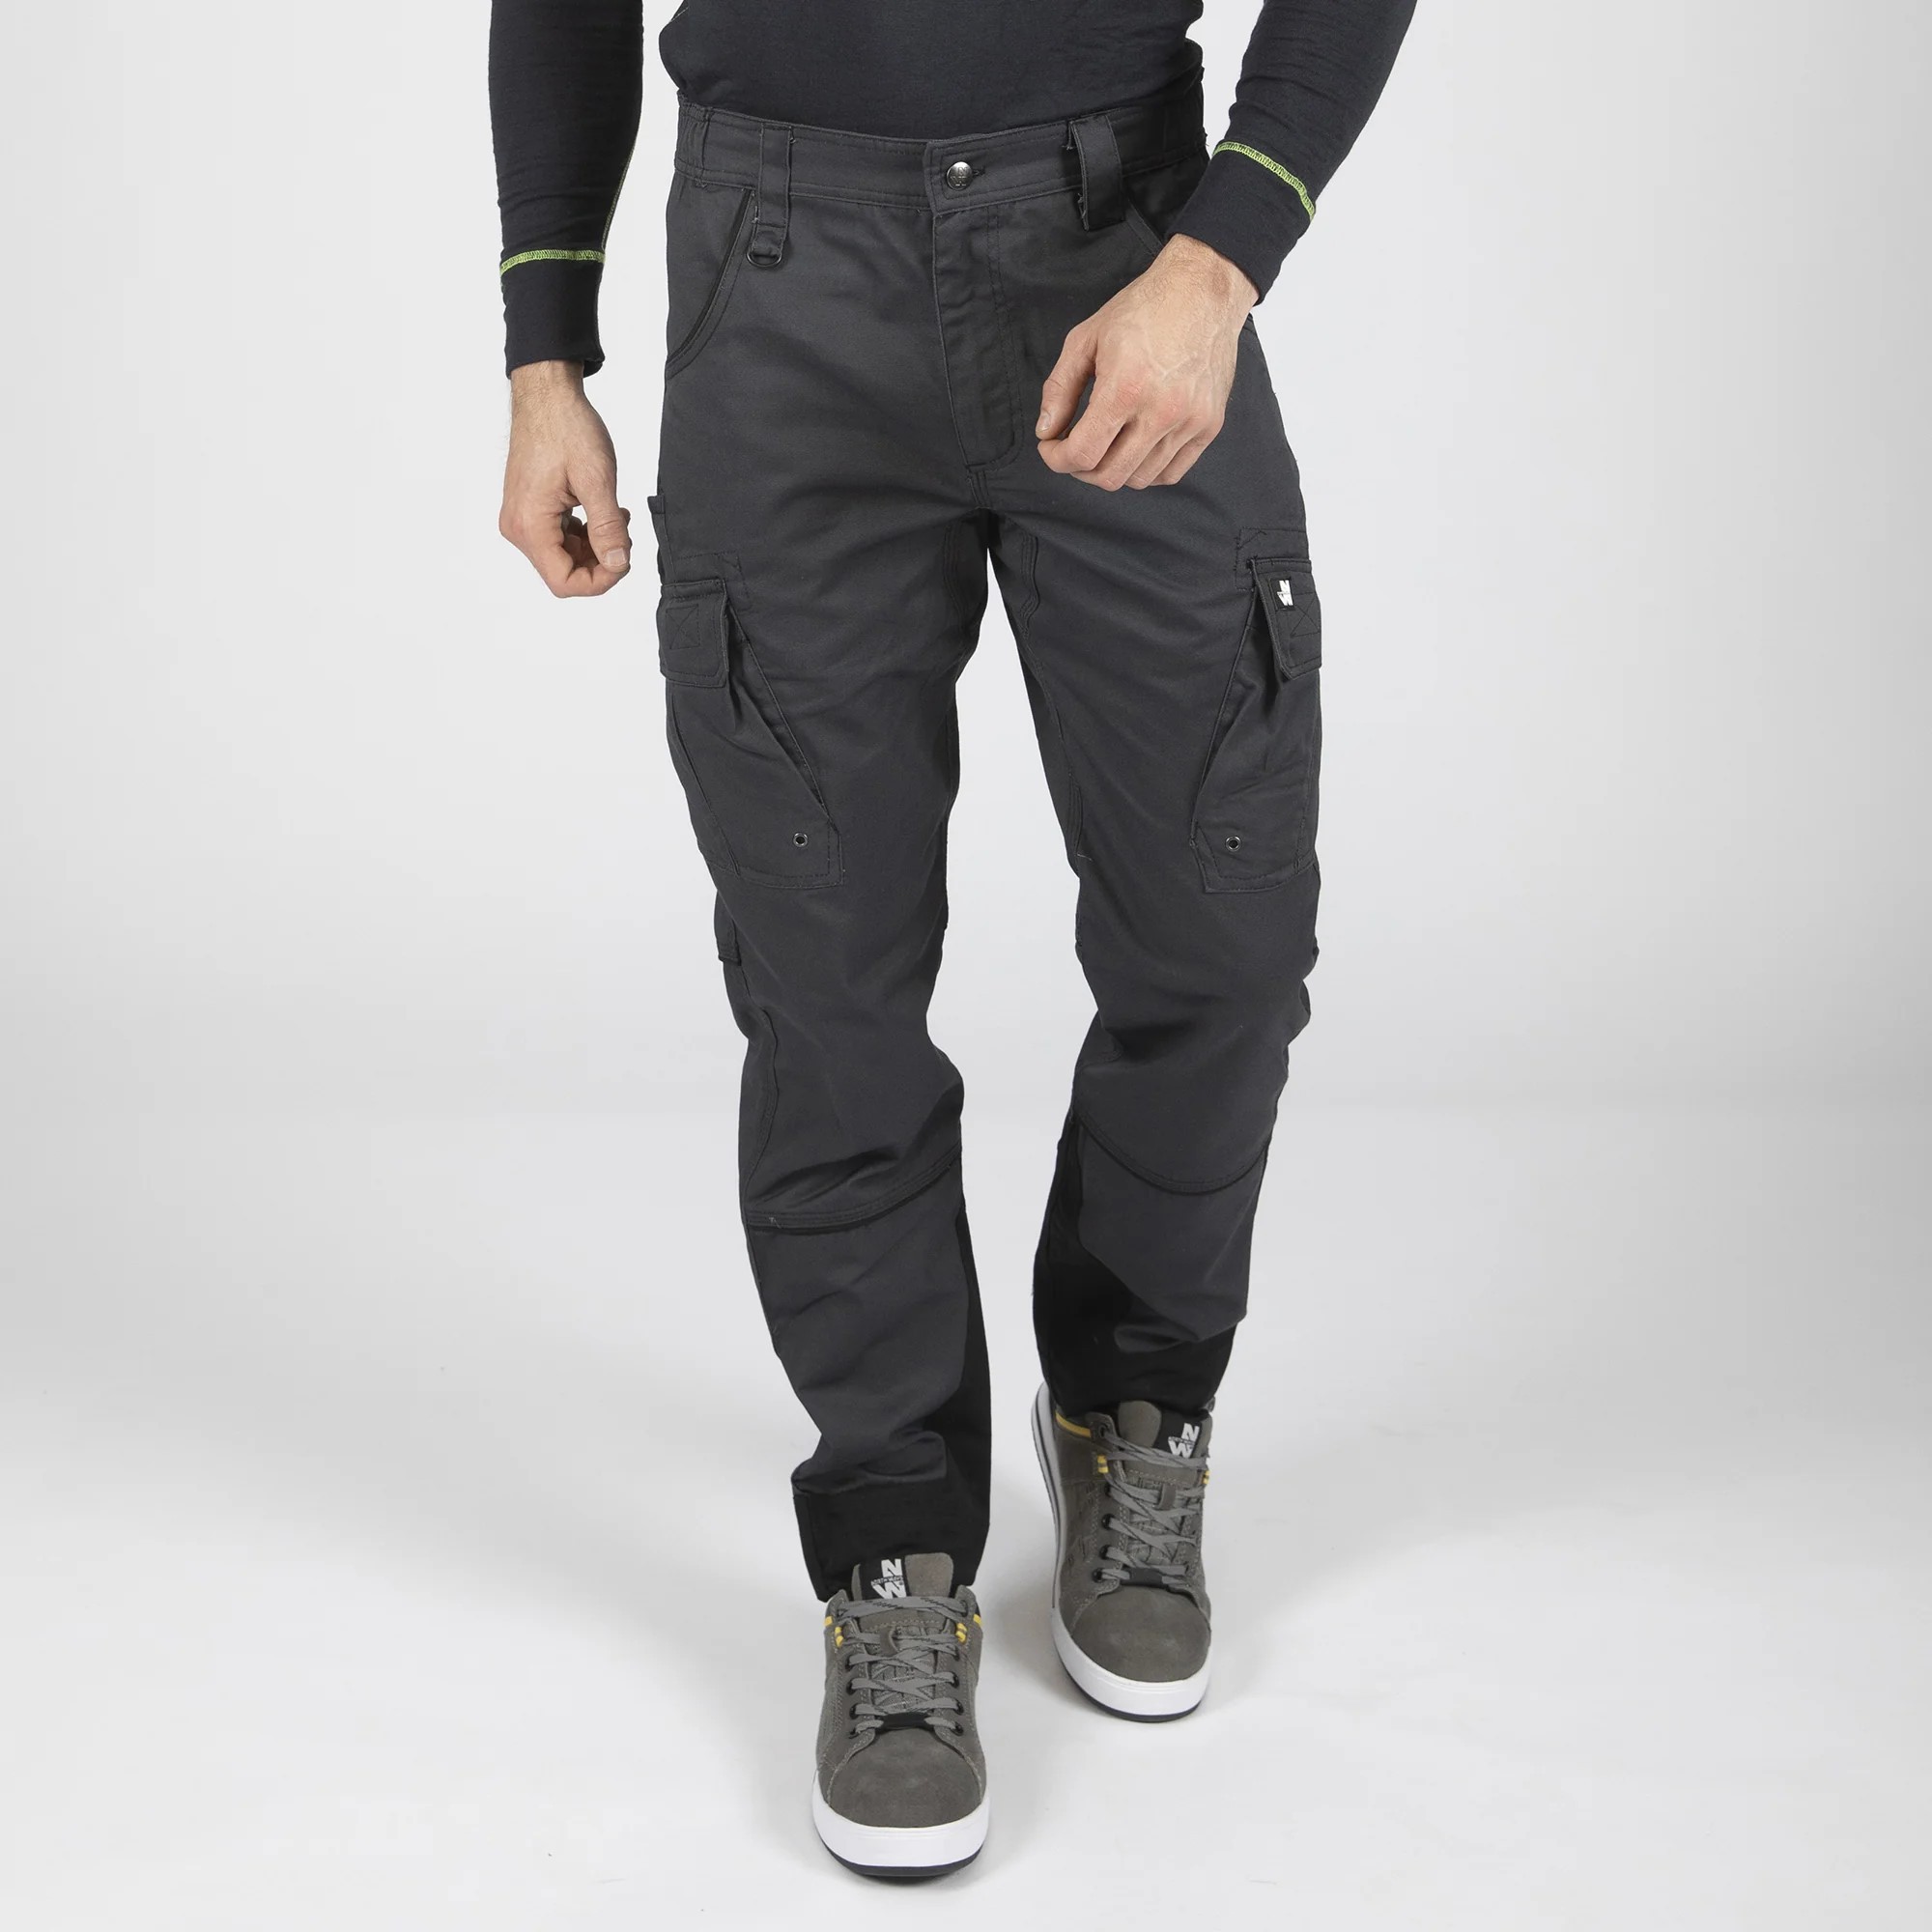 Pantalon travail multipoches homme Antras NW gris